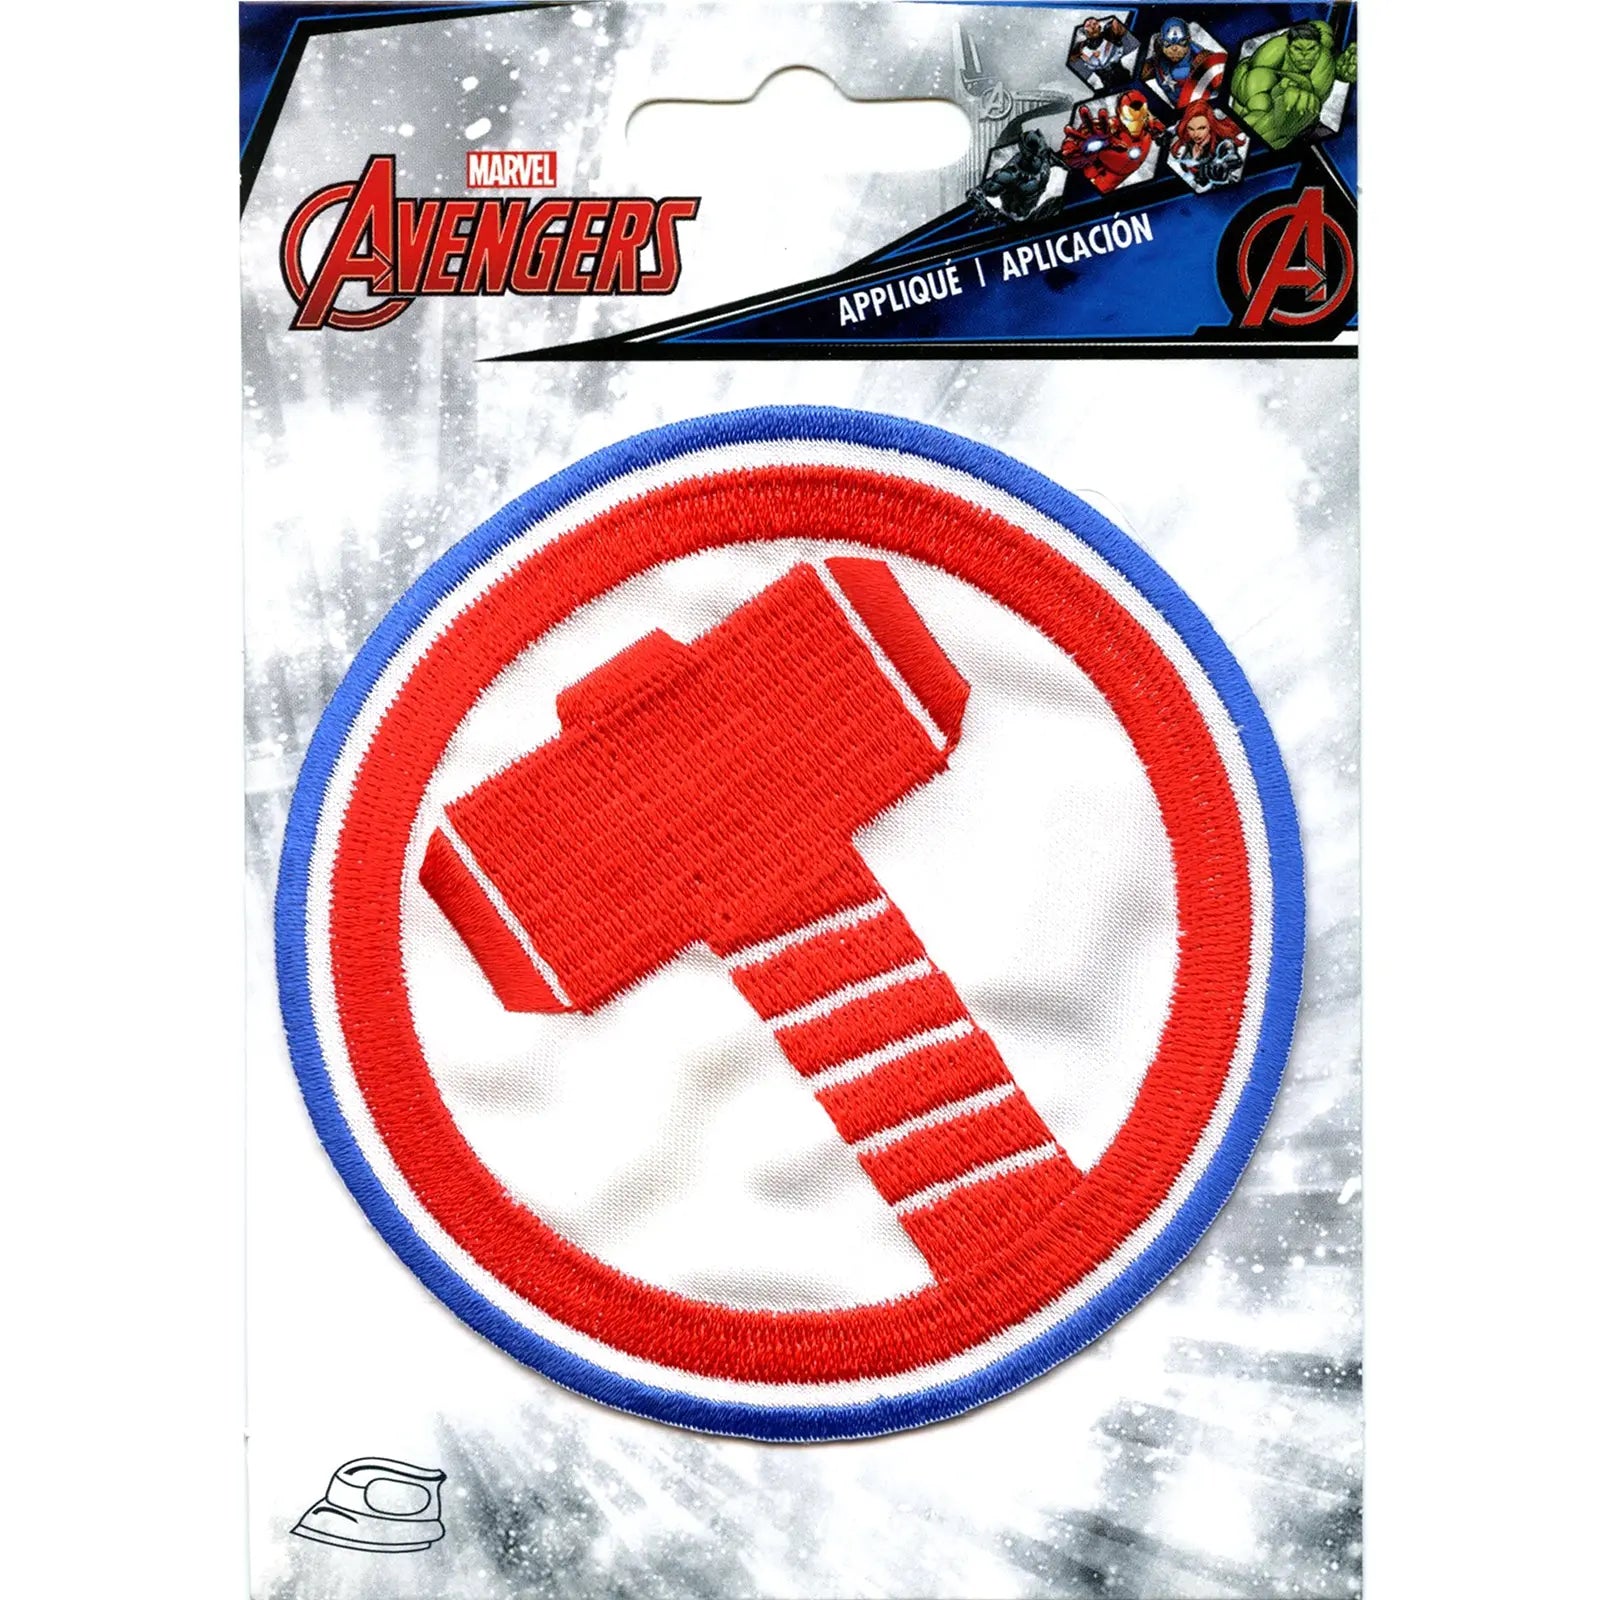 Marvel Avengers Thor's Hammer Logo Iron on Applique Patch 